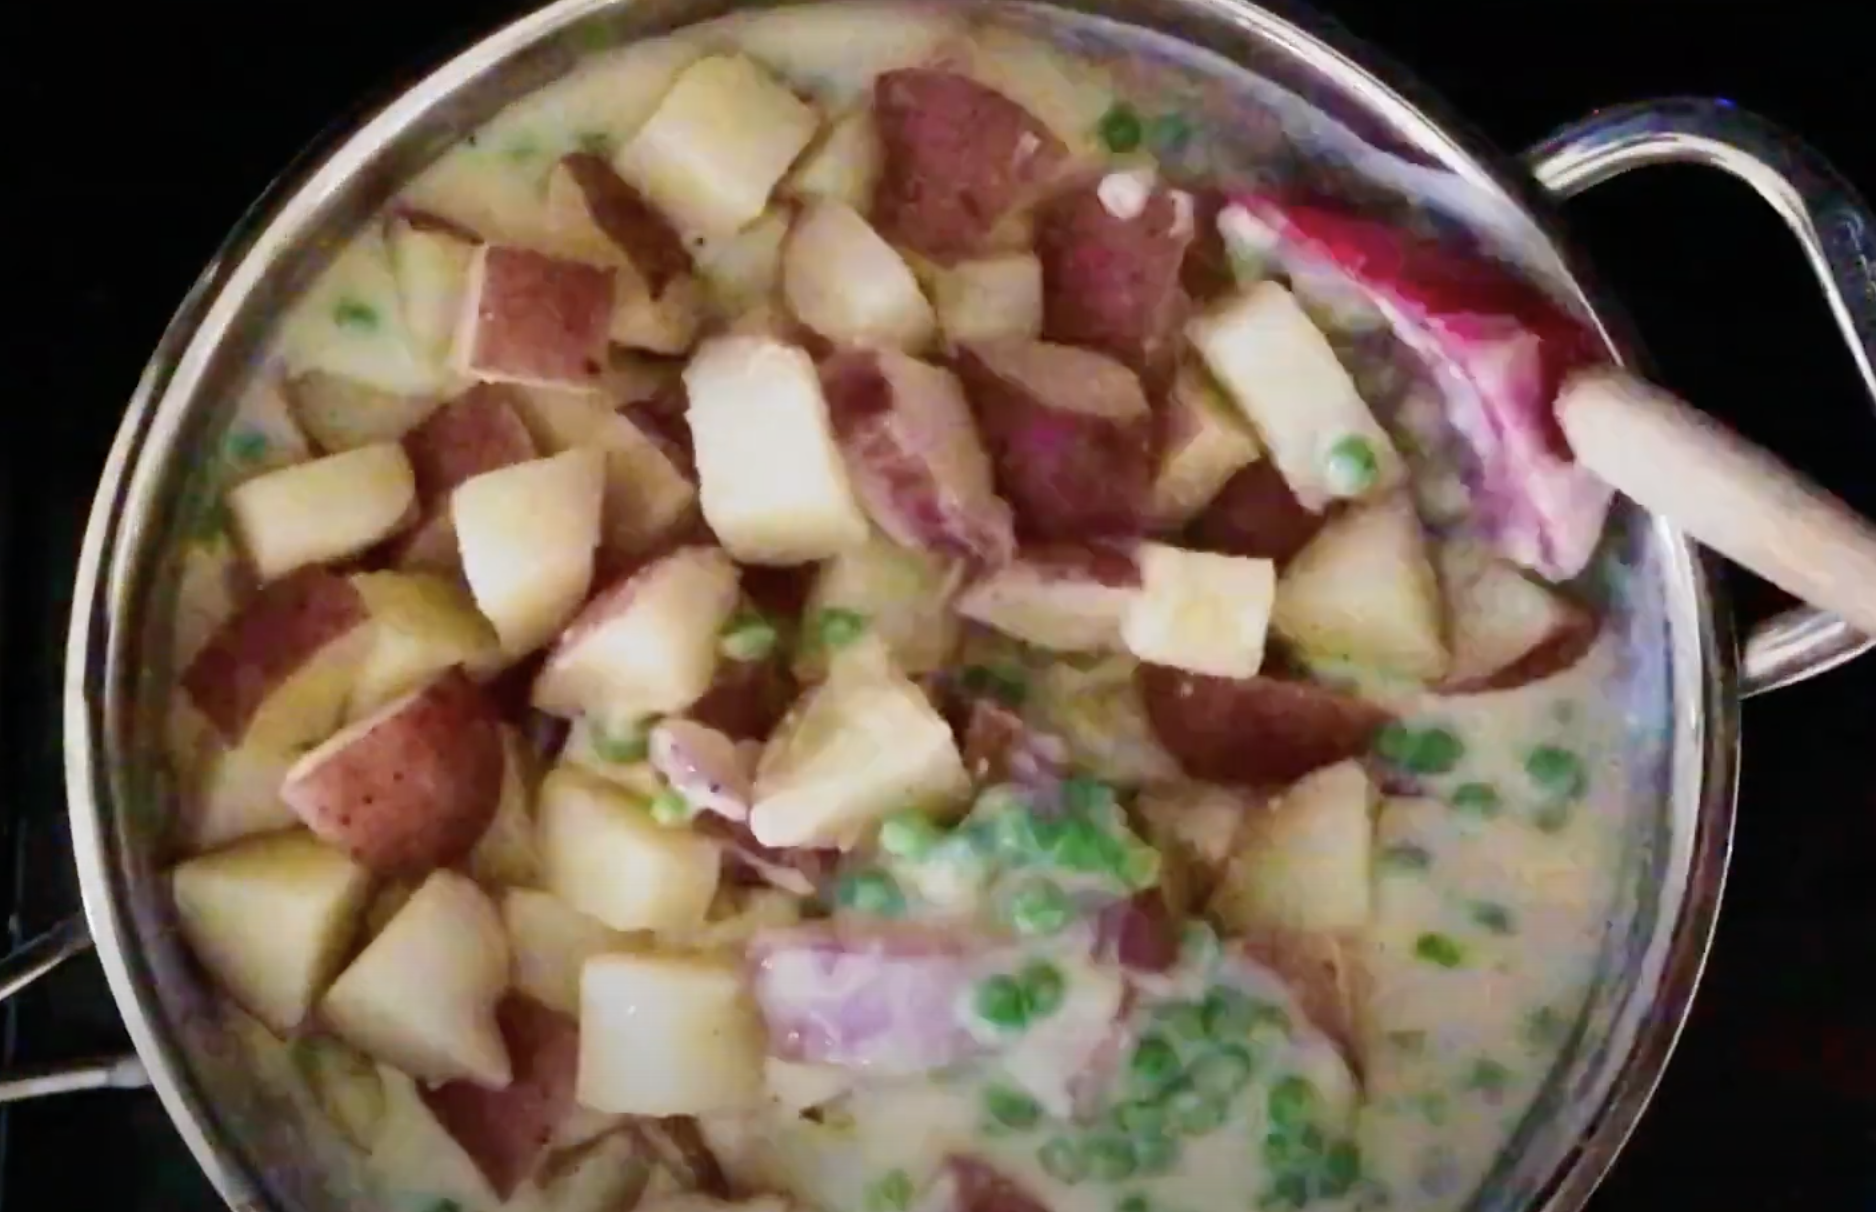 Red potatoes being stirred into a skillet with peas and cream sauce.